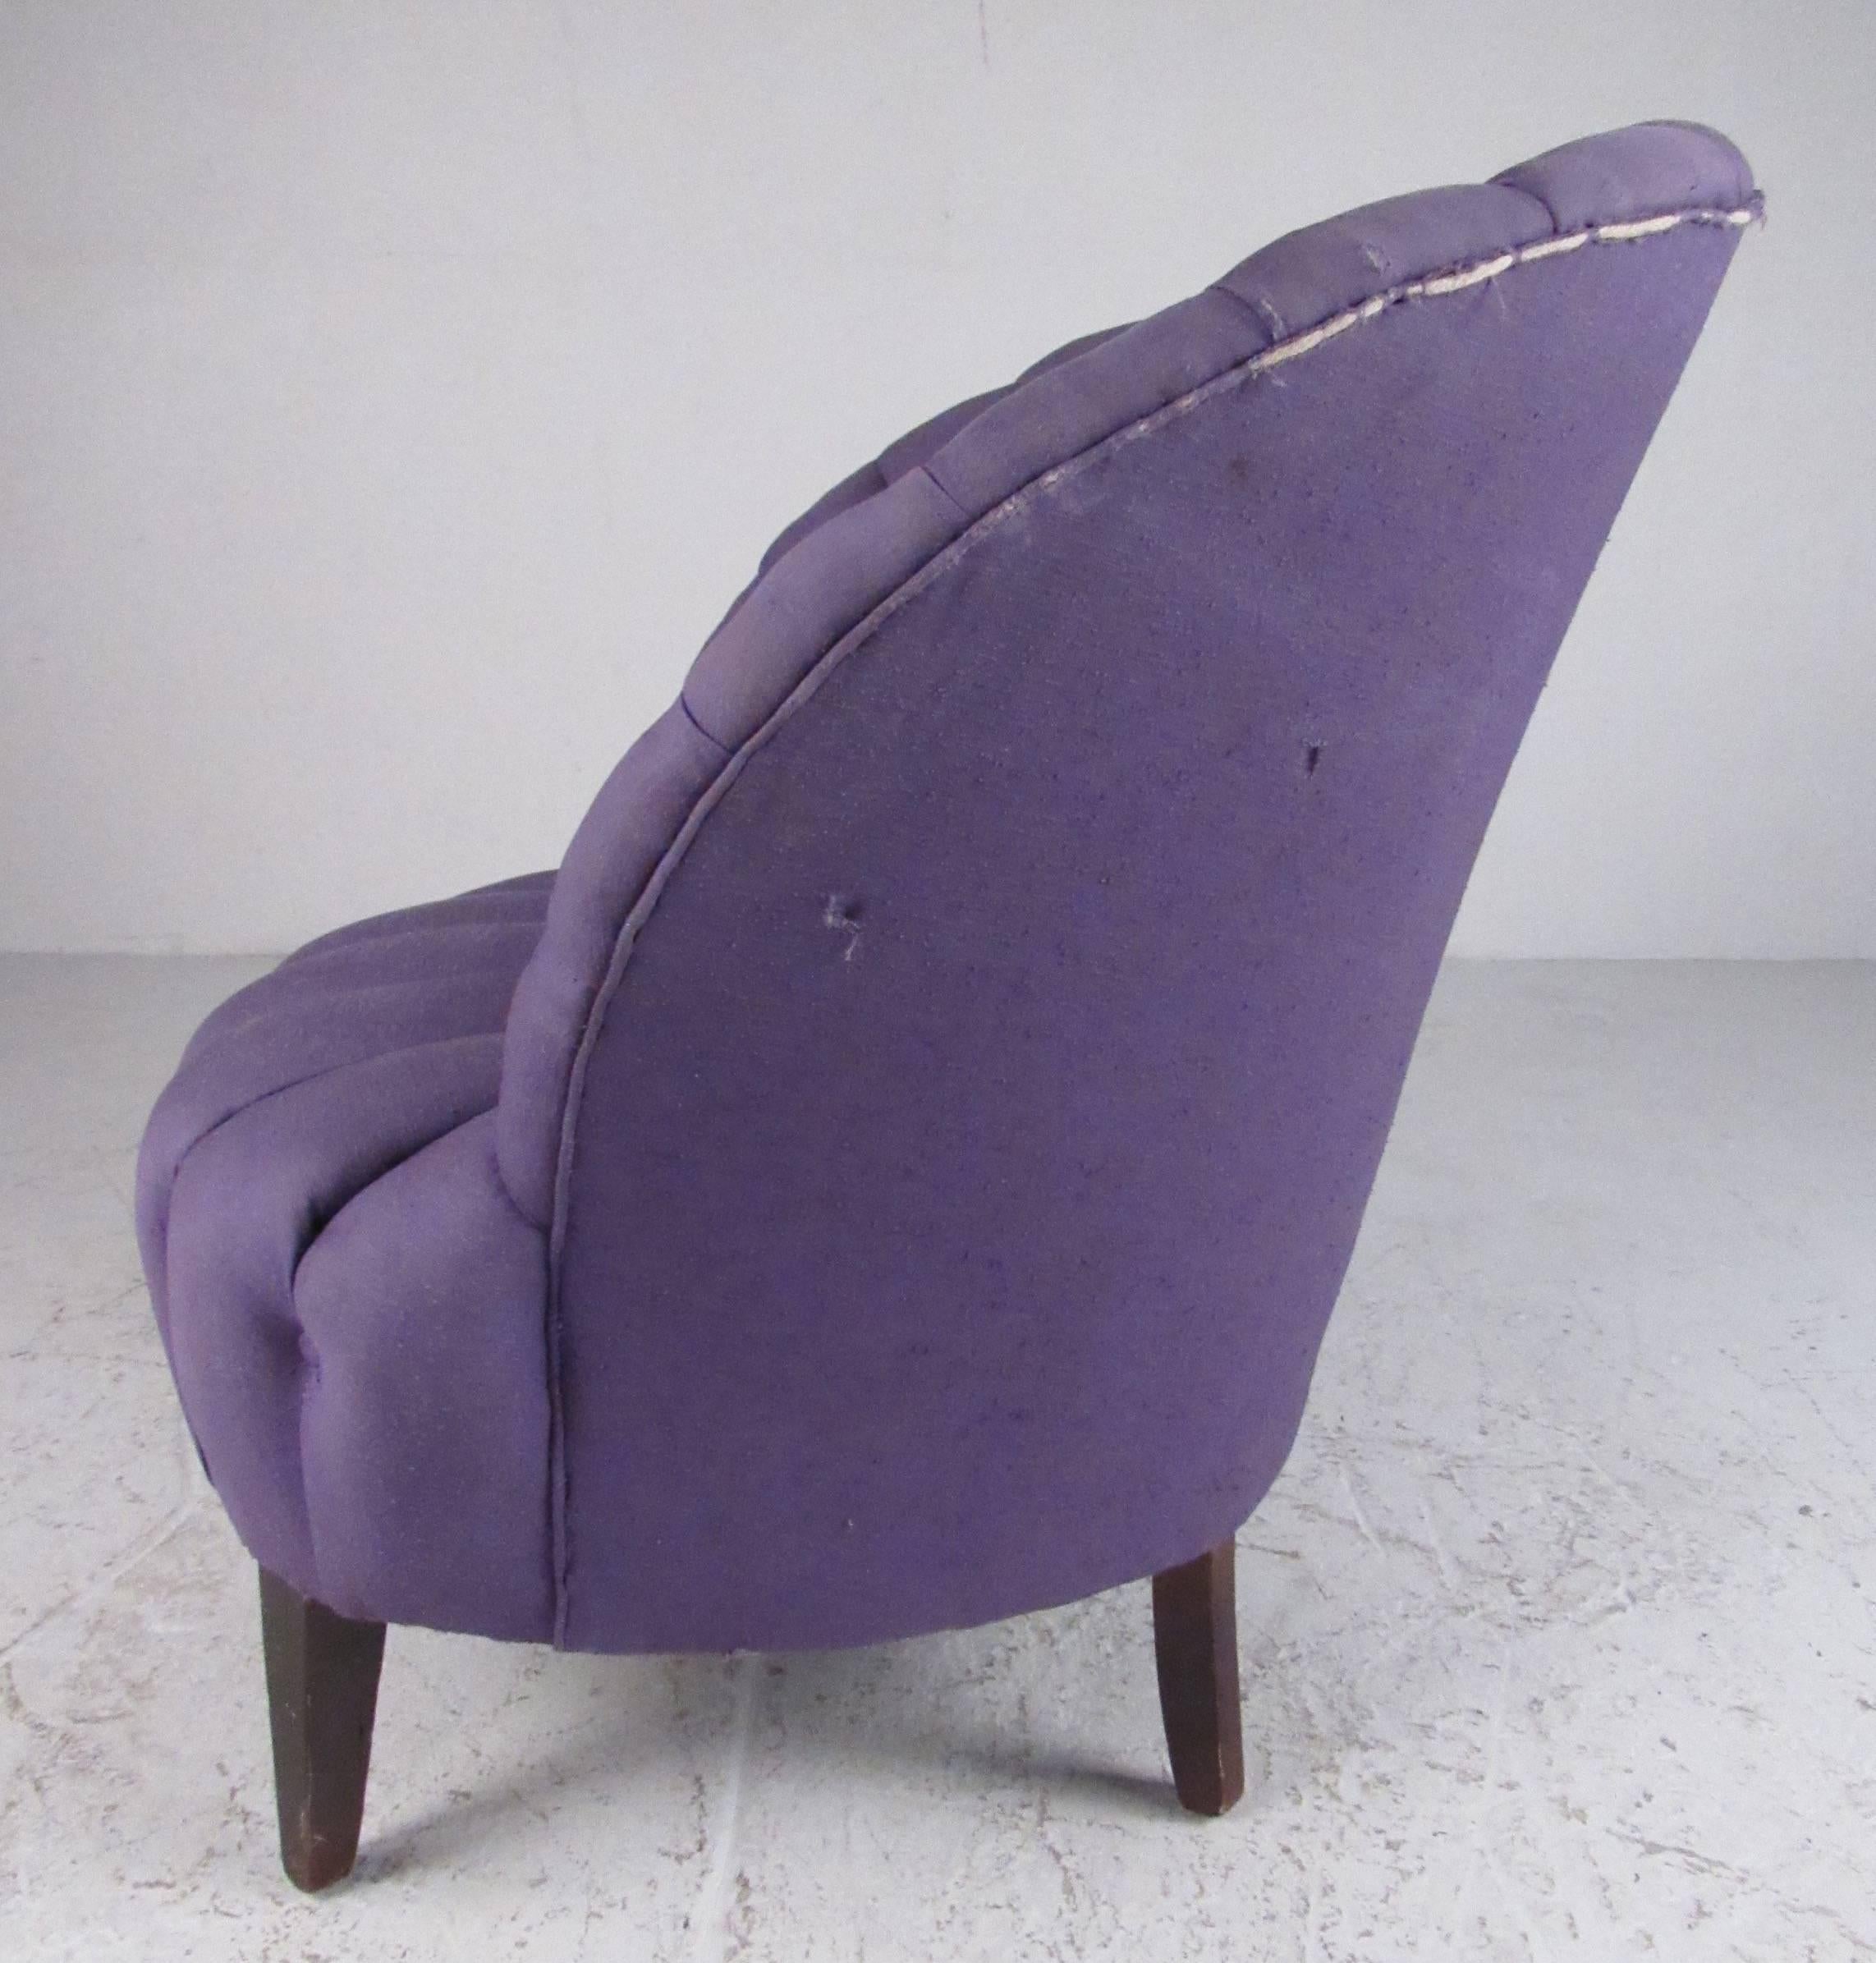 American Channel Tufted Art Deco Slipper Chair